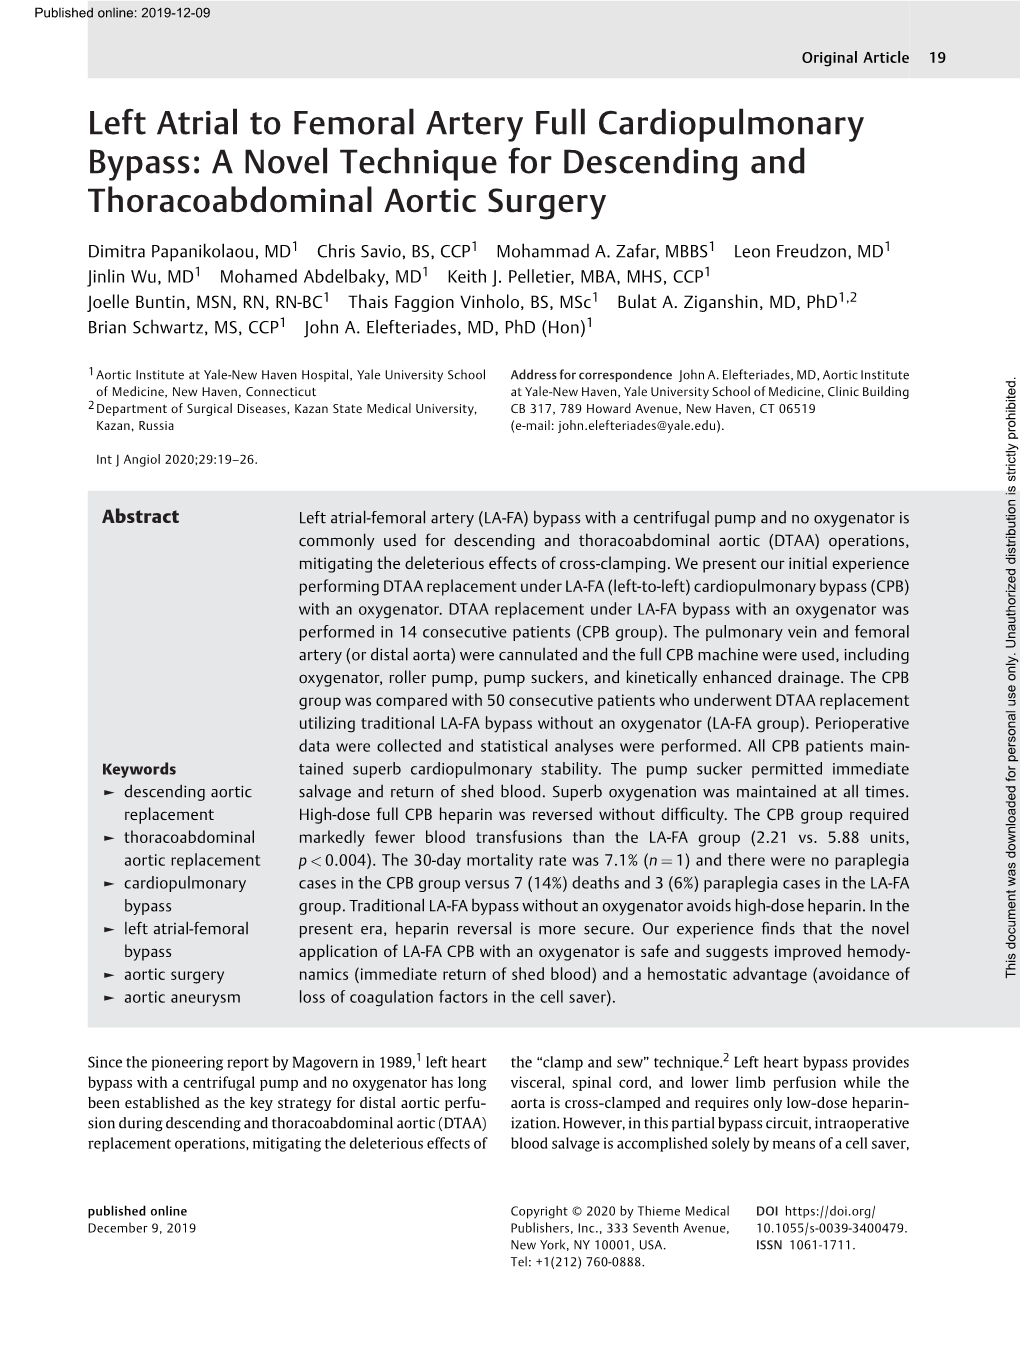 Left Atrial to Femoral Artery Full Cardiopulmonary Bypass: a Novel Technique for Descending and Thoracoabdominal Aortic Surgery